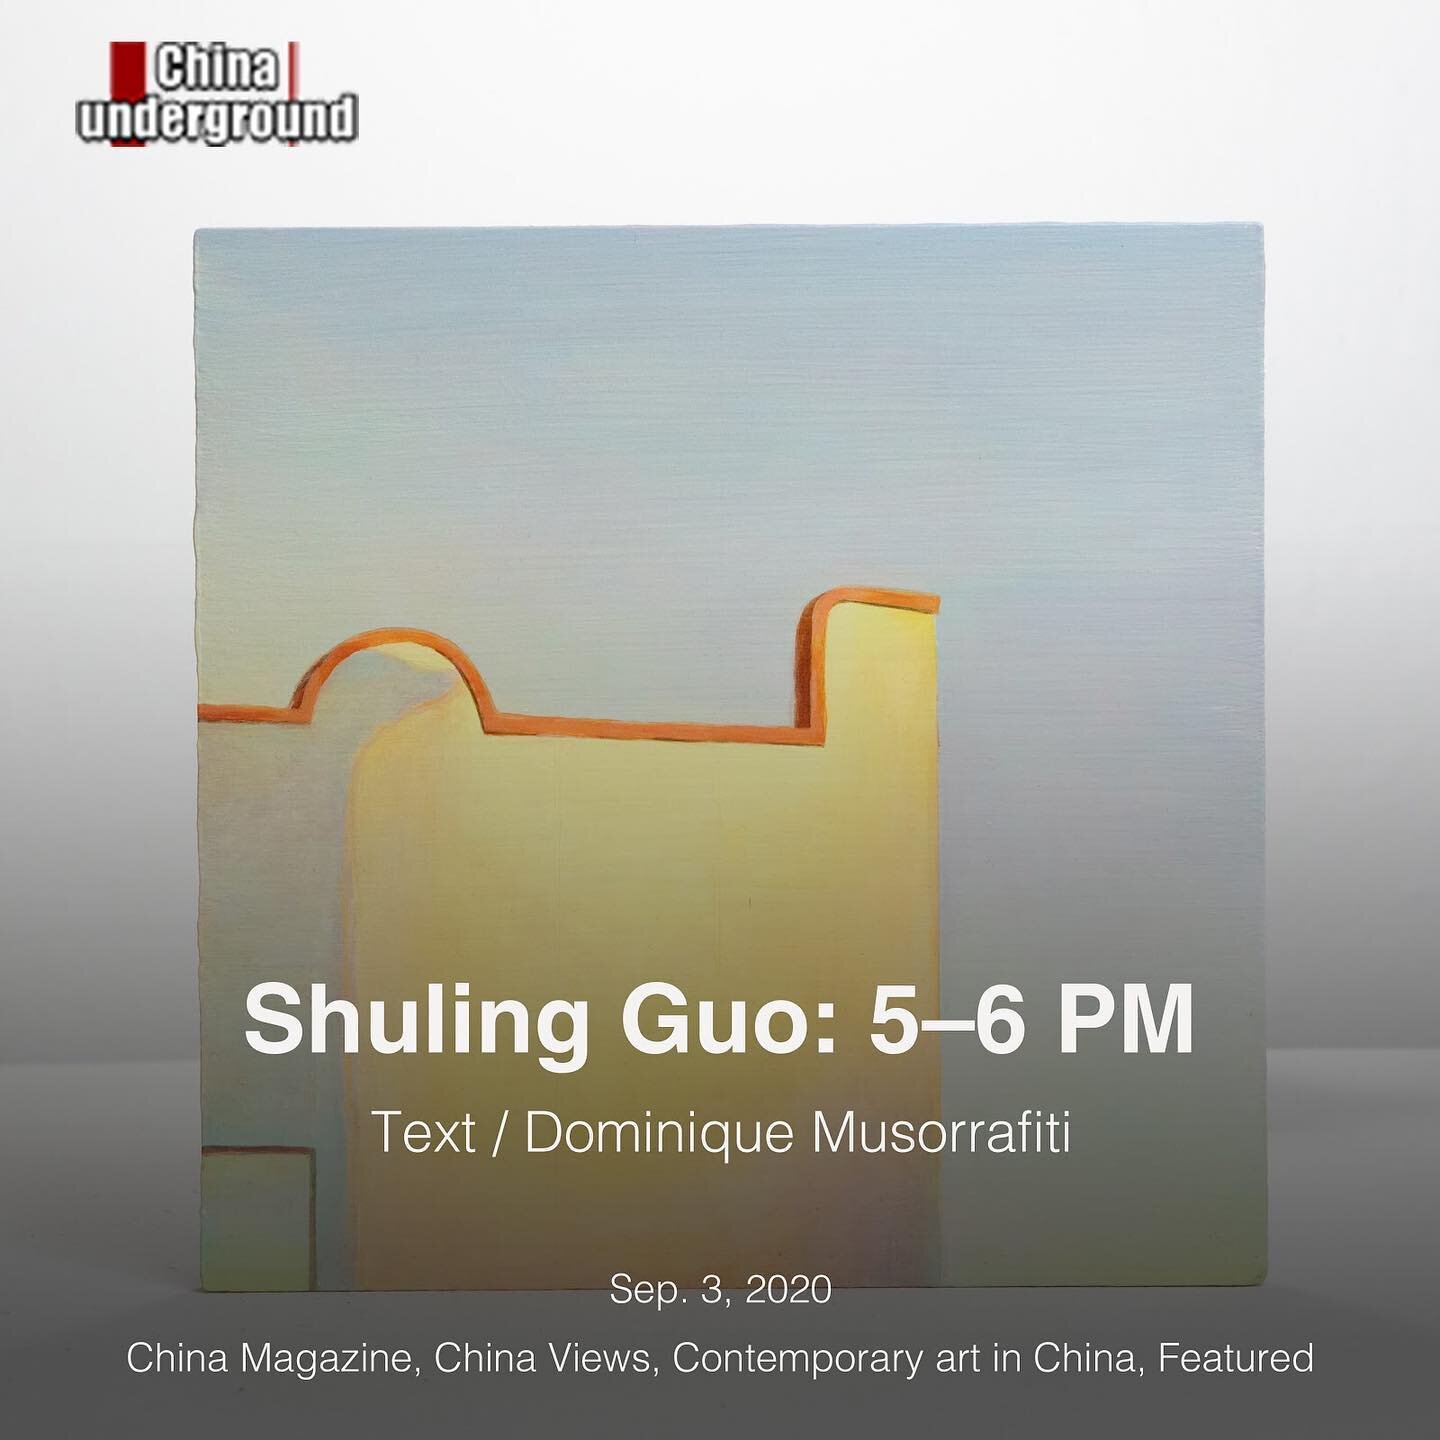 China-underground has published Dominique Musorrafiti&rsquo;s article  on Shuling Guo: 5&ndash;6 pm. Read the full article at https://china-underground.com/2020/09/03/shuling-guo-5-6-pm/.